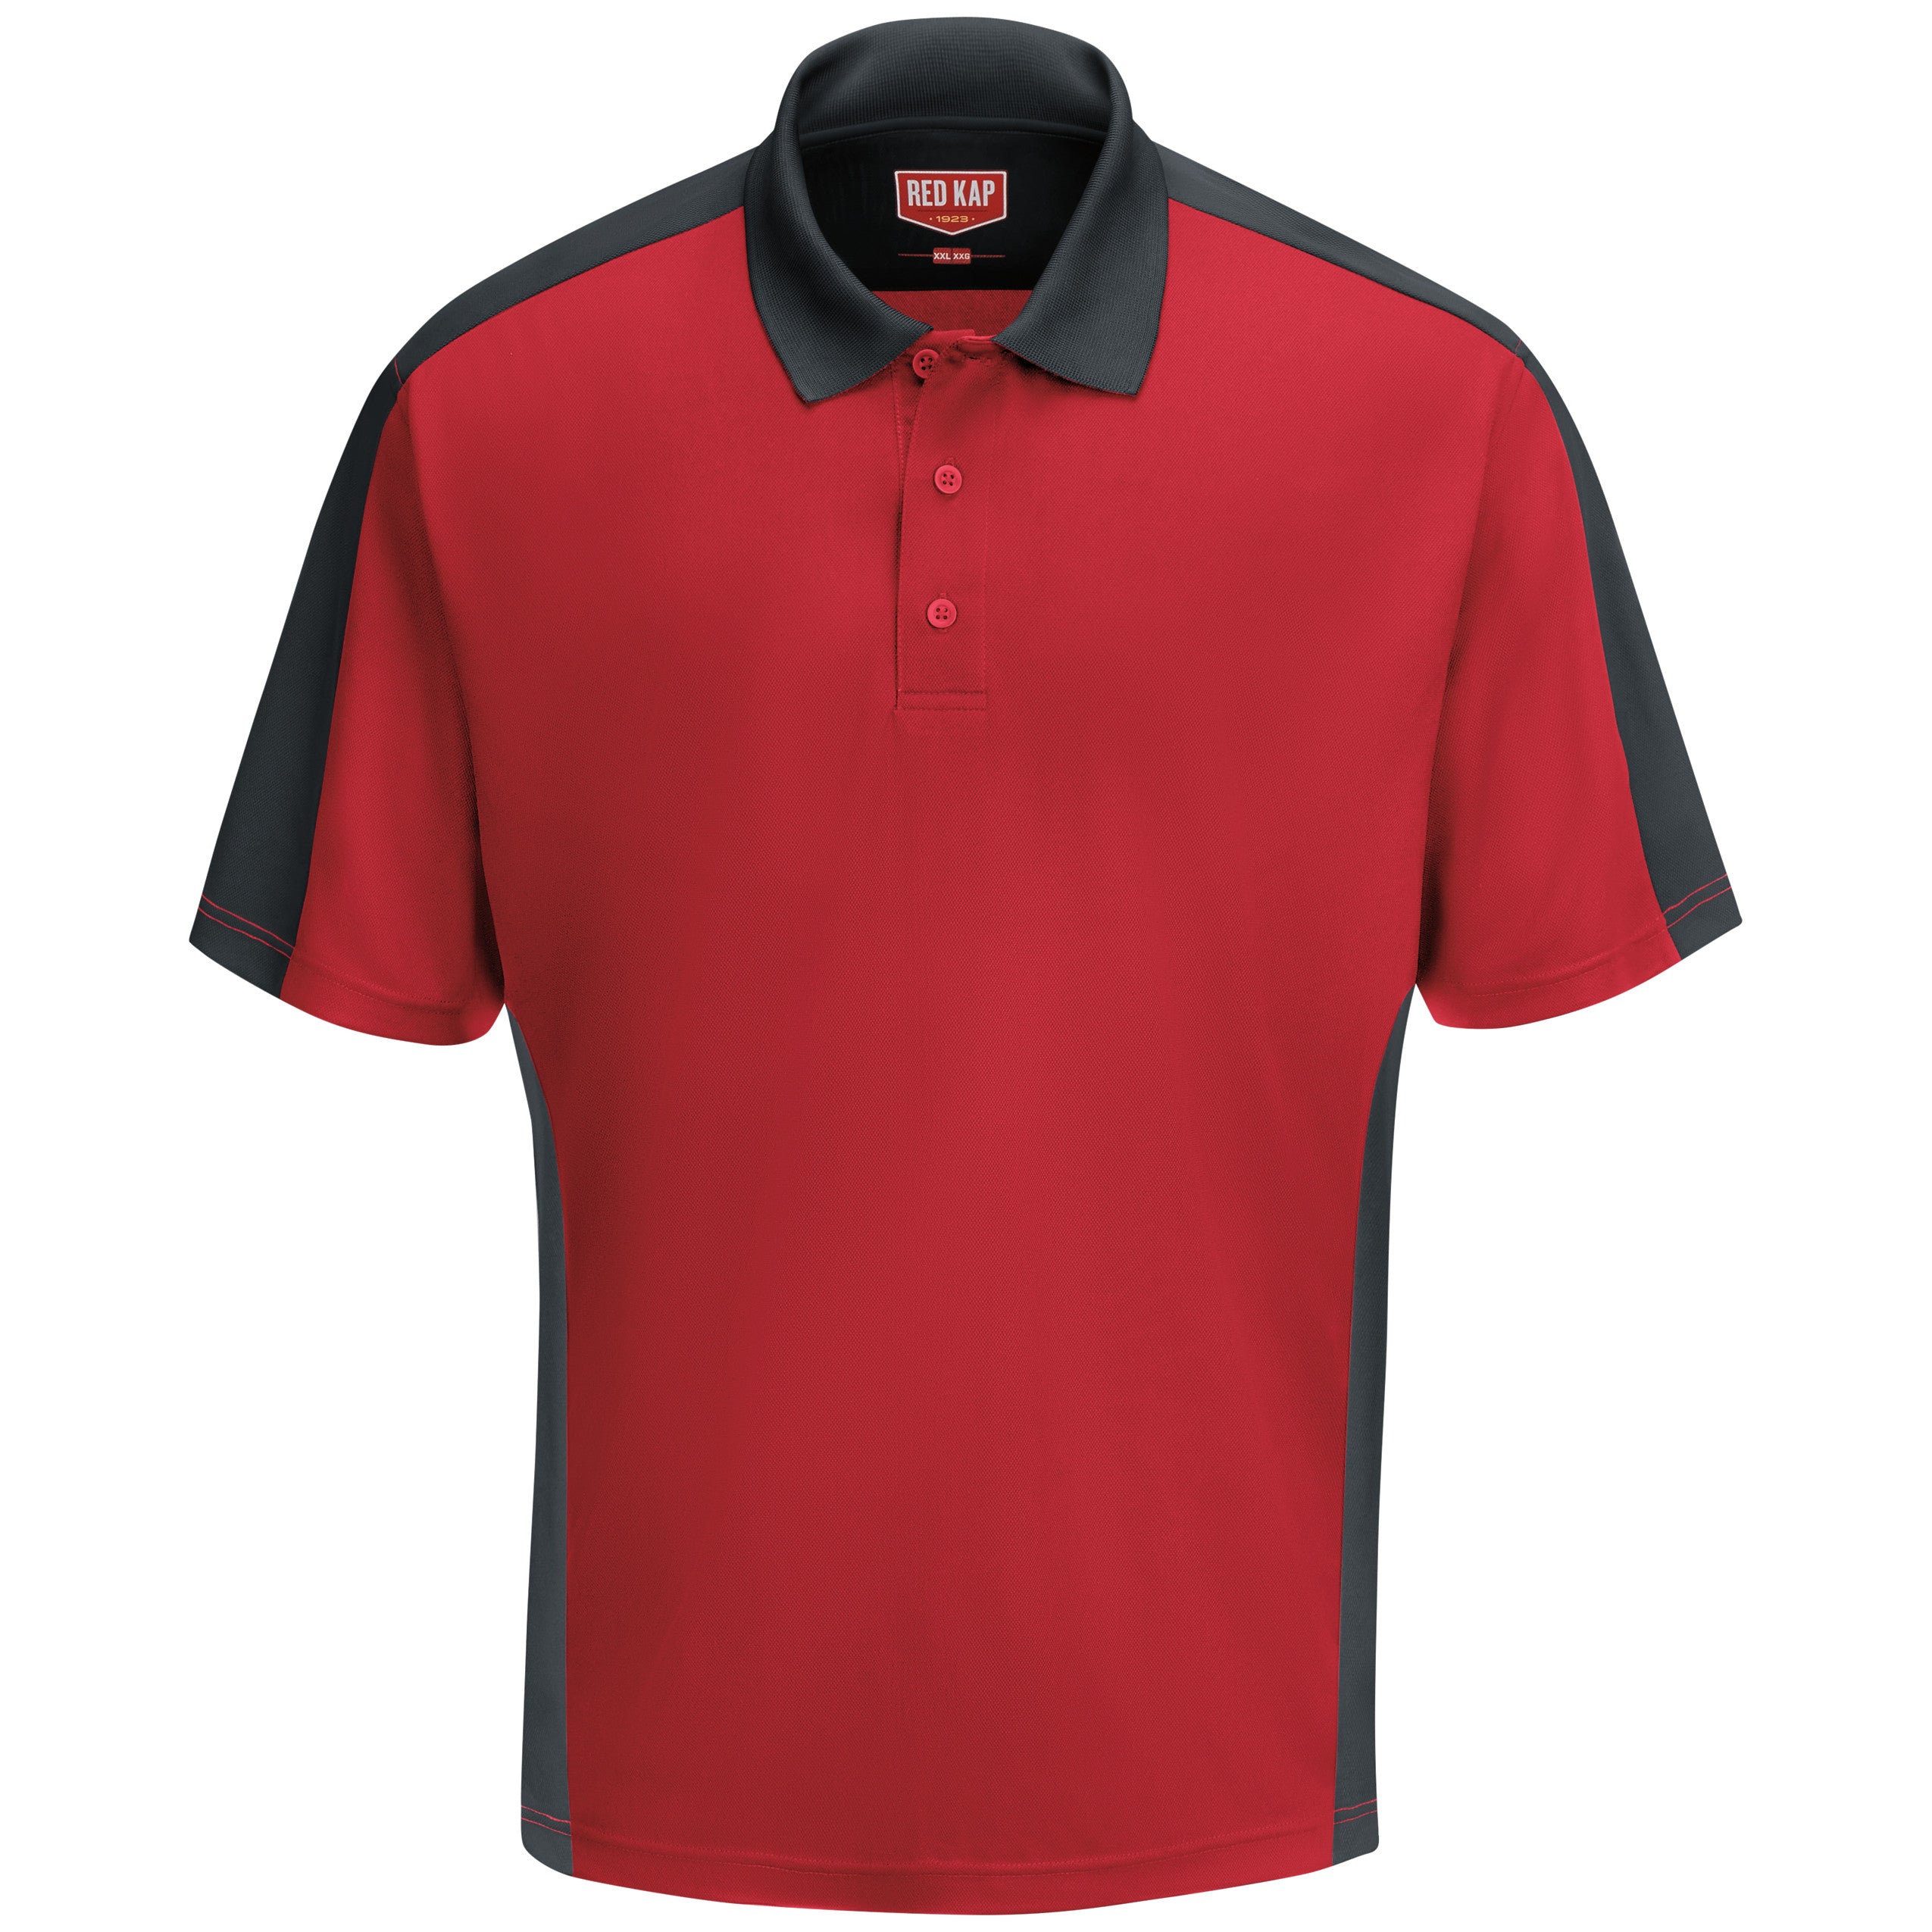 Men's Short Sleeve Performance Knit Two-Tone Polo SK54 - Red/Charcoal-eSafety Supplies, Inc